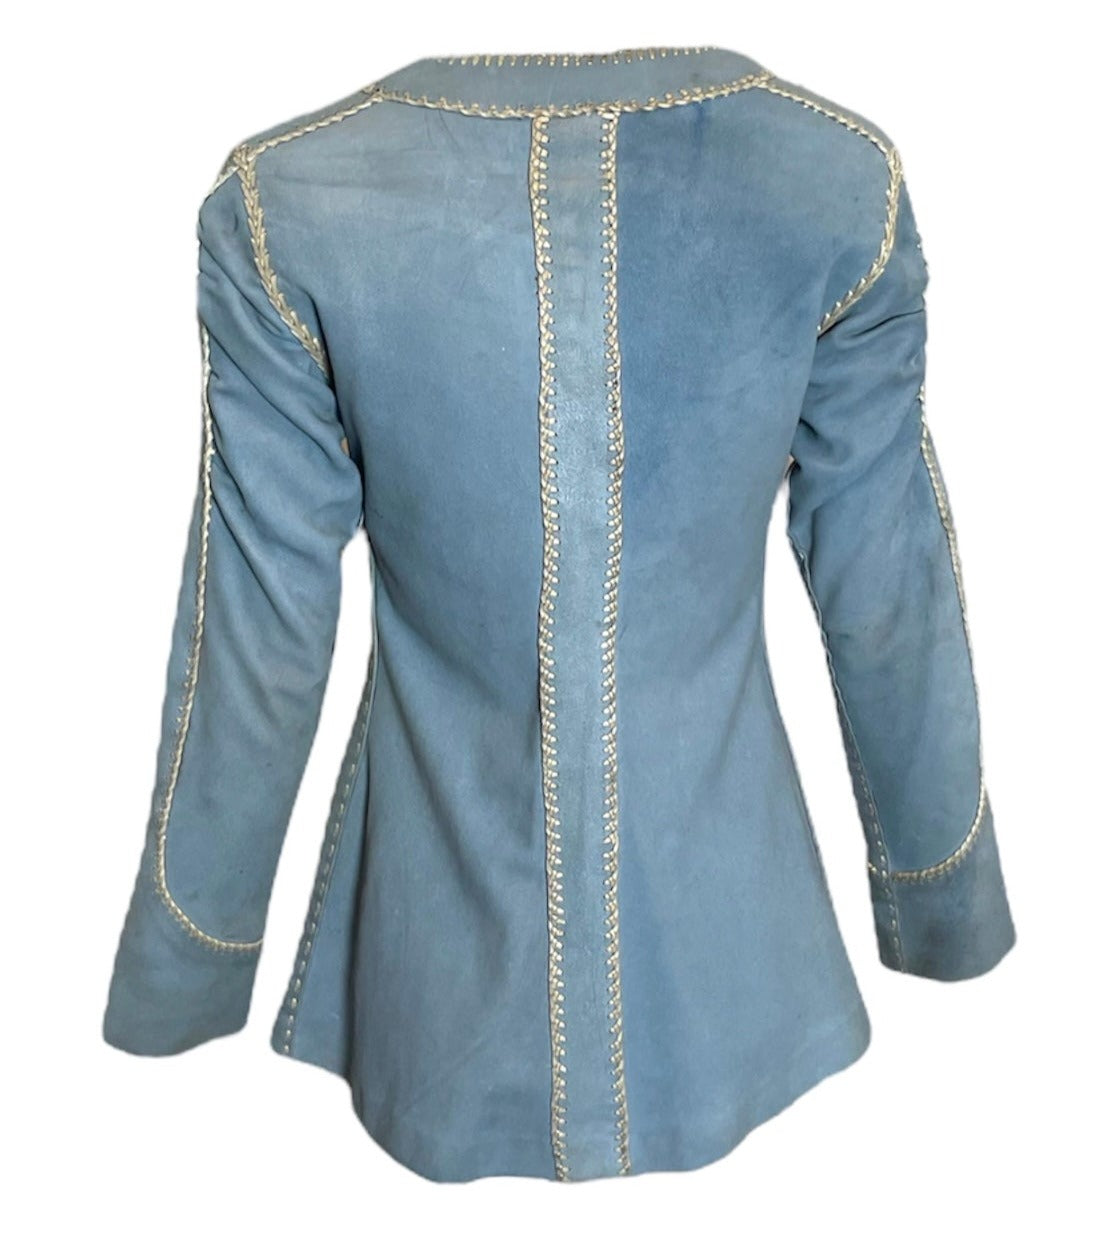 North Beach Leather 70s Baby Blue Suede Whipstitch Jacket, back